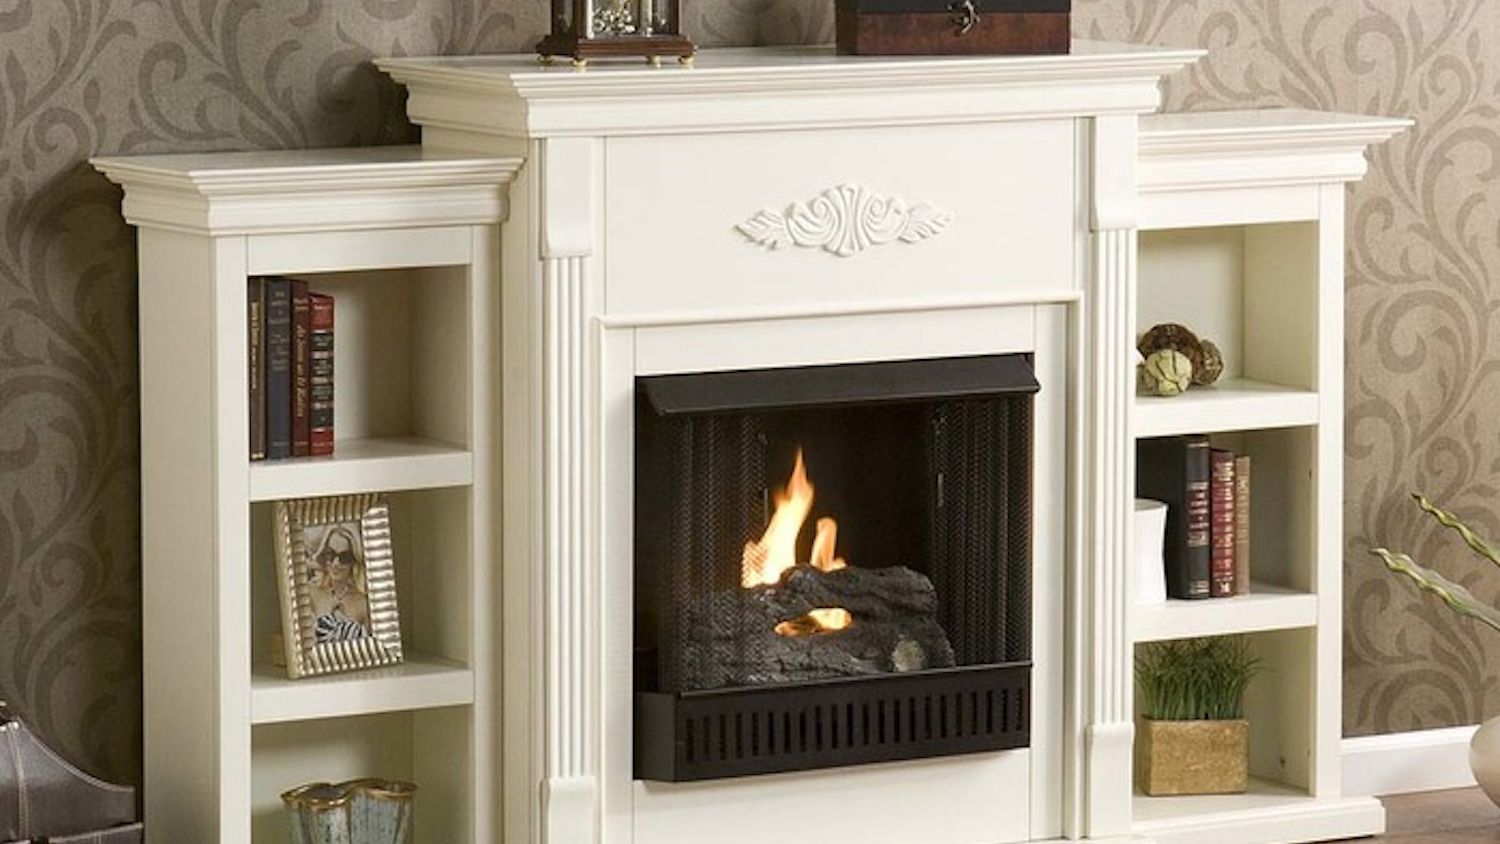 Free Standing Indoor Gas Fireplace Luxury How to Use Gel Fuel Fireplaces Indoors or Outdoors